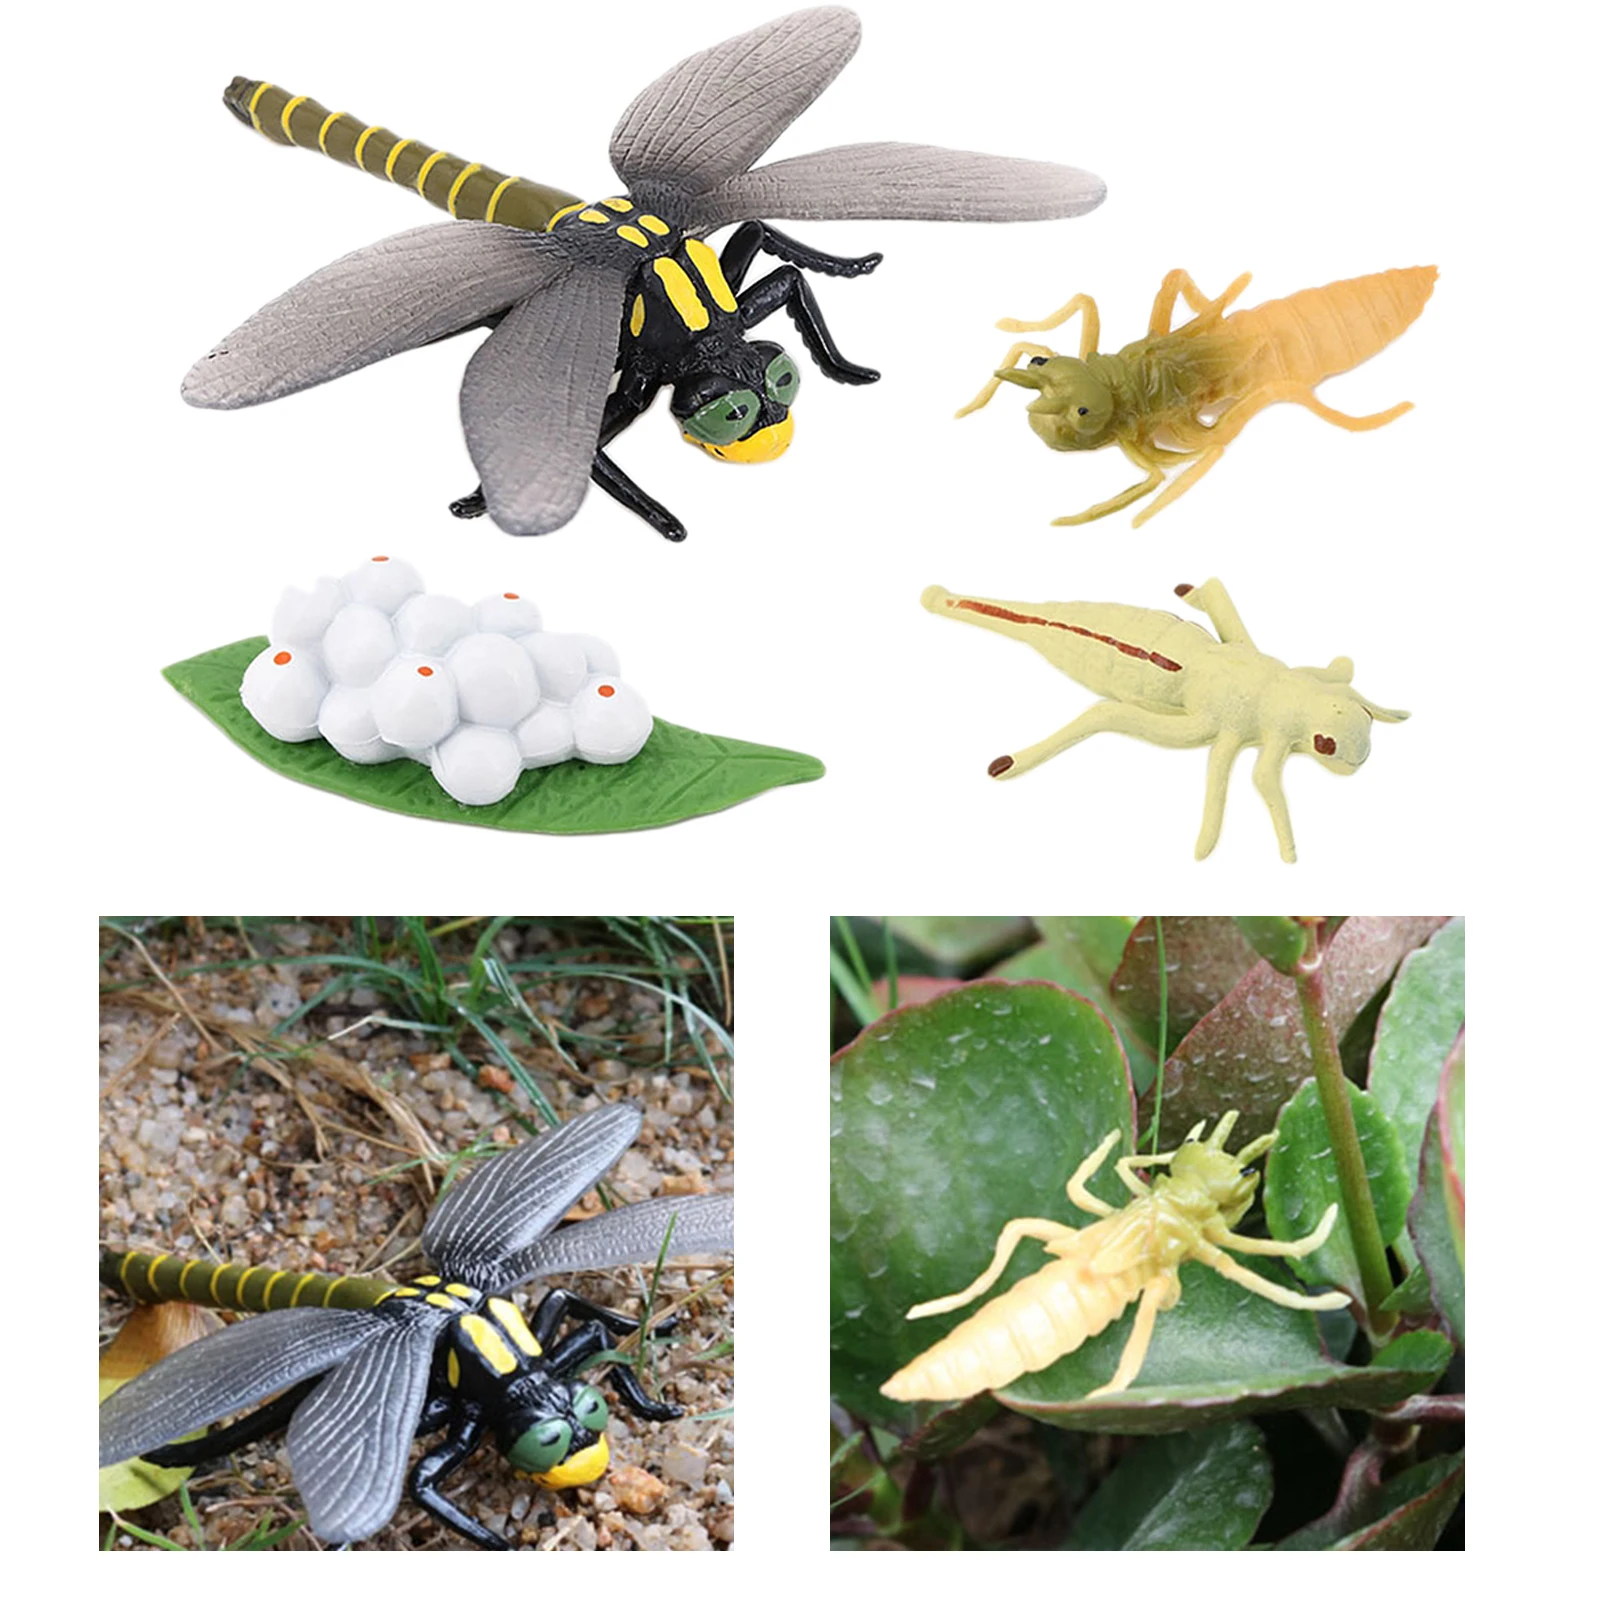 Details about   Nature Wasp Insects Life Cycles Growth Model Game Prop Animal Illustration 